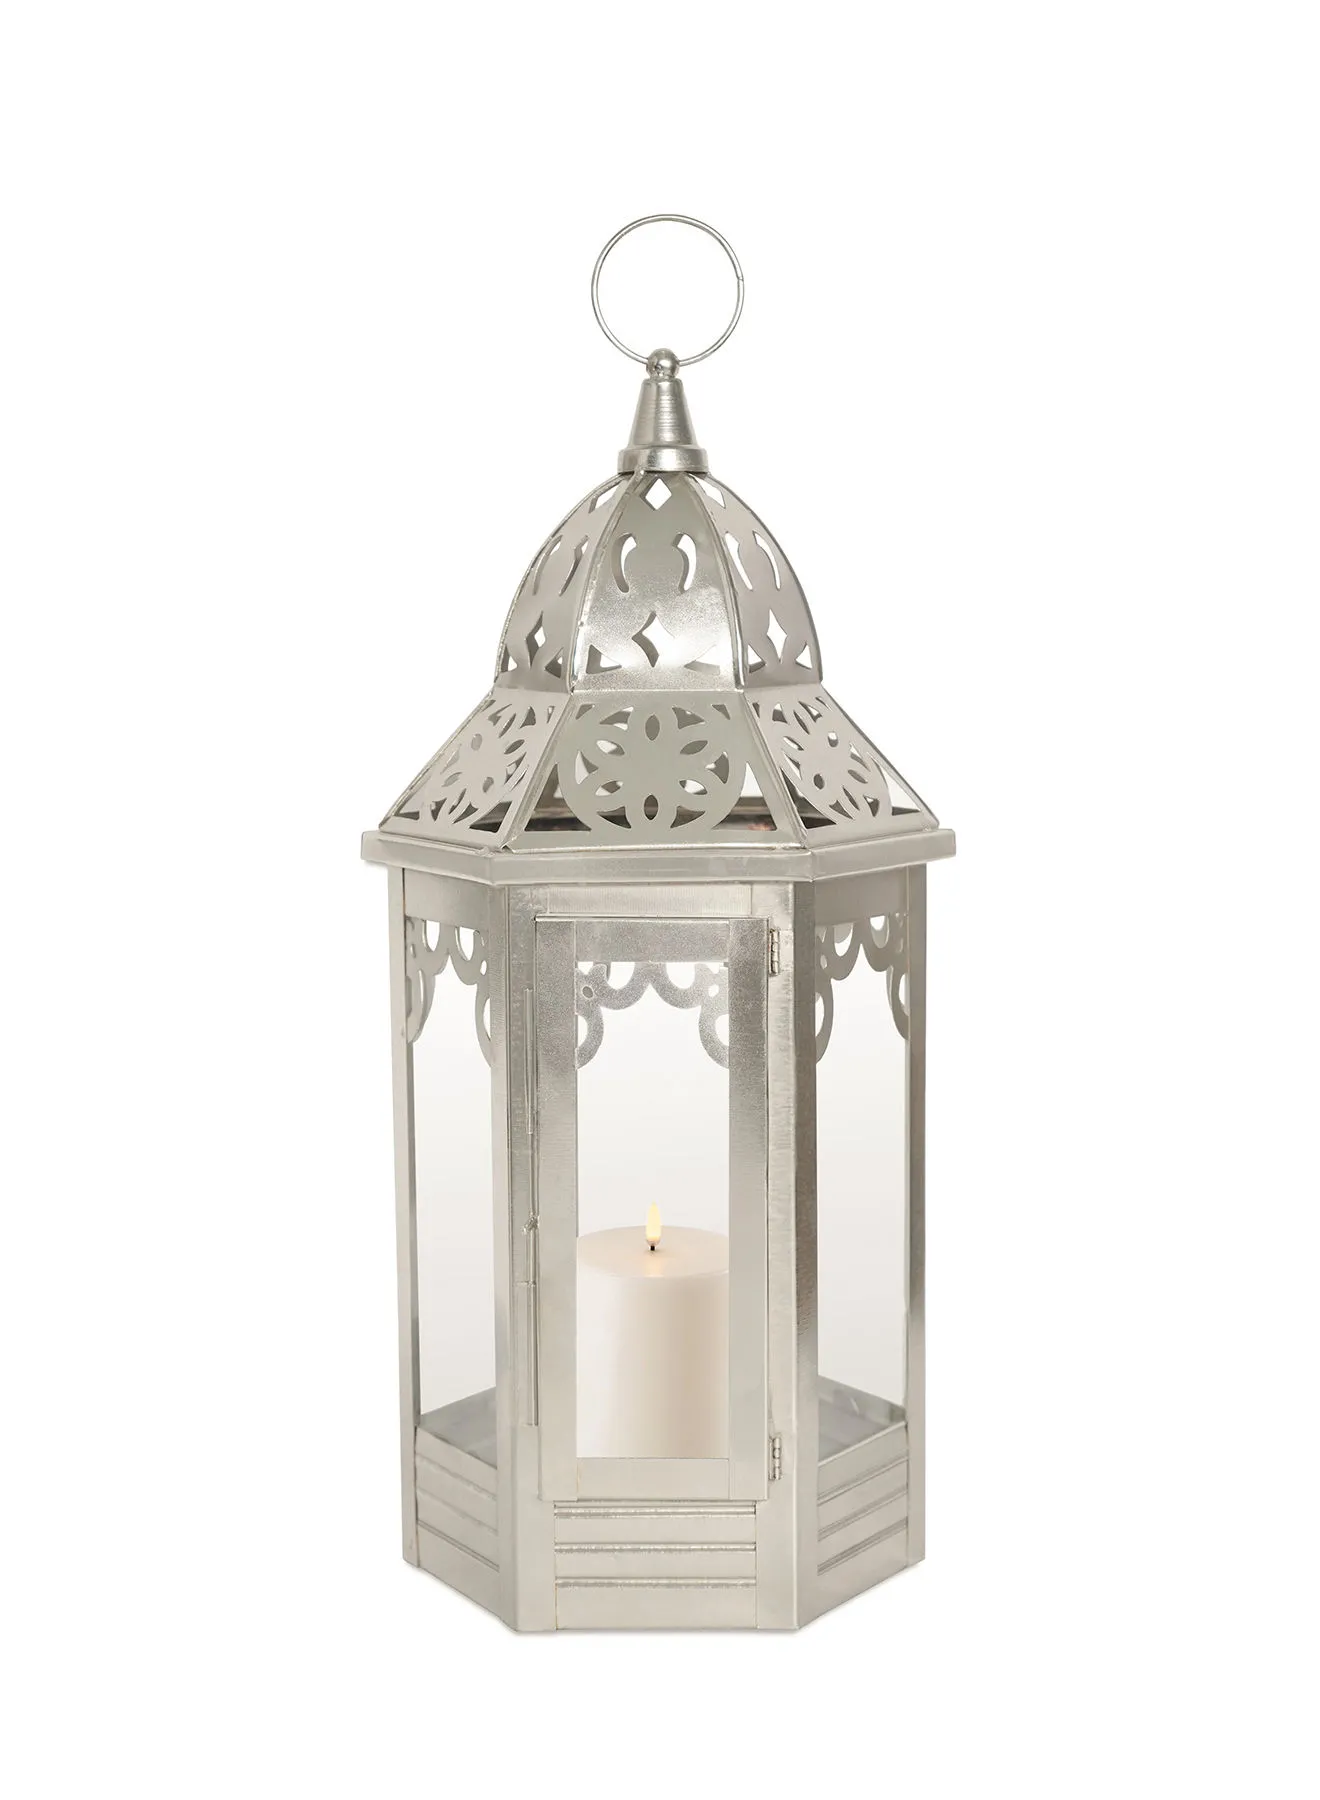 ebb & flow Modern Ideal Design Handmade Lantern Unique Luxury Quality Scents For The Perfect Stylish Home Silver 12X12X40centimeter